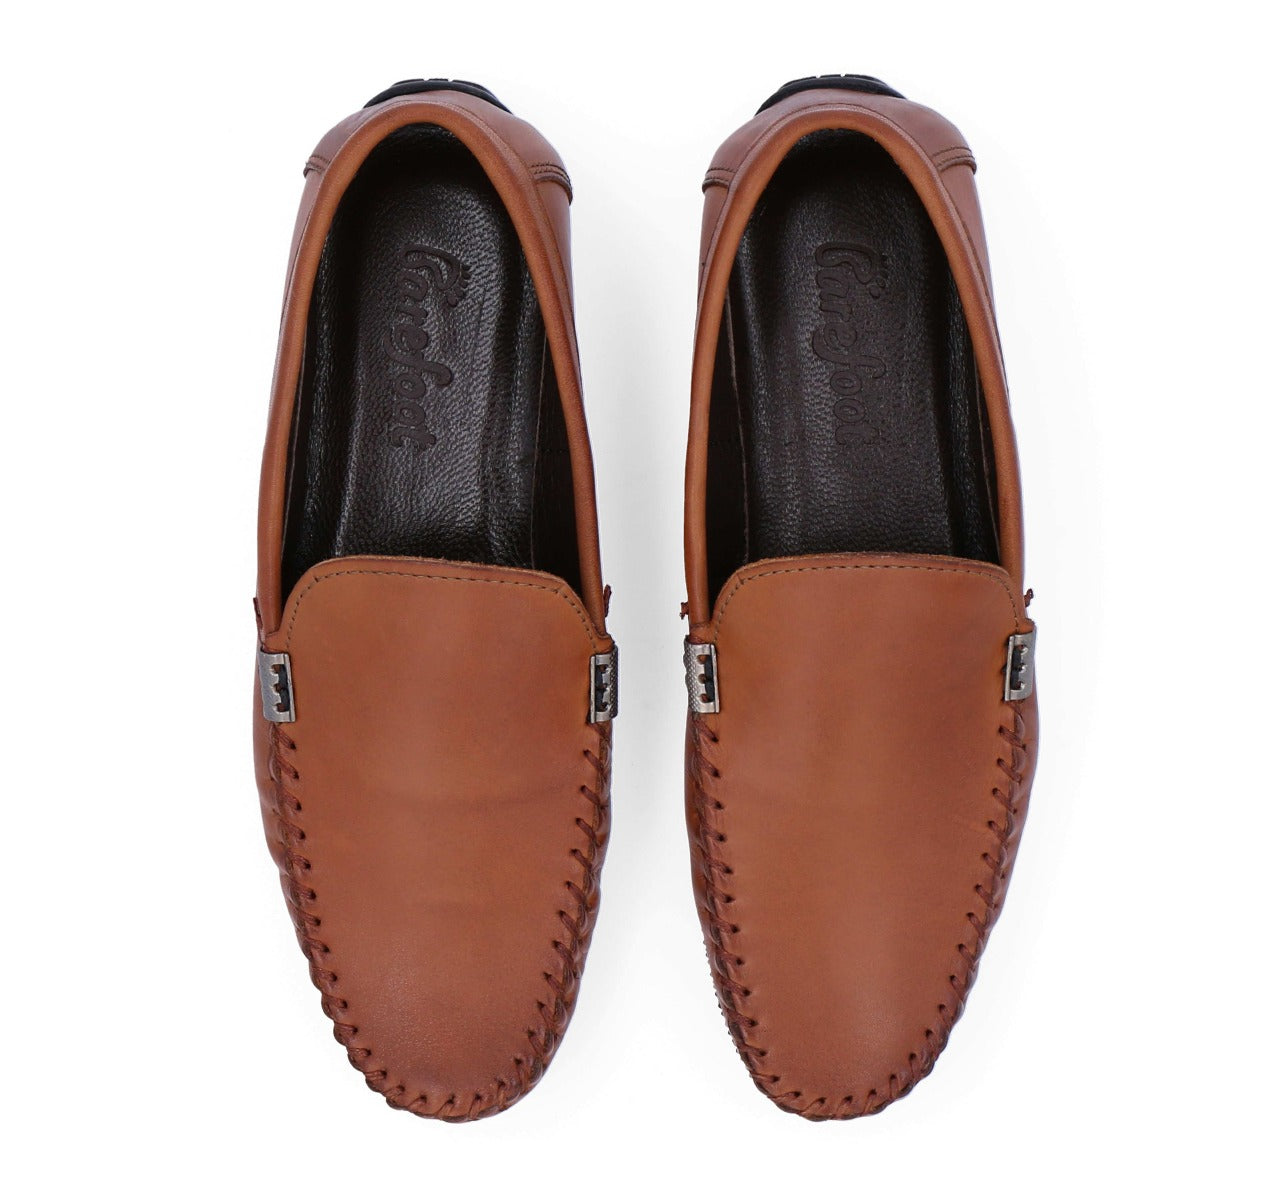 Barefoot Brown Loafer's Slip-On with Black Sole For Men 6666